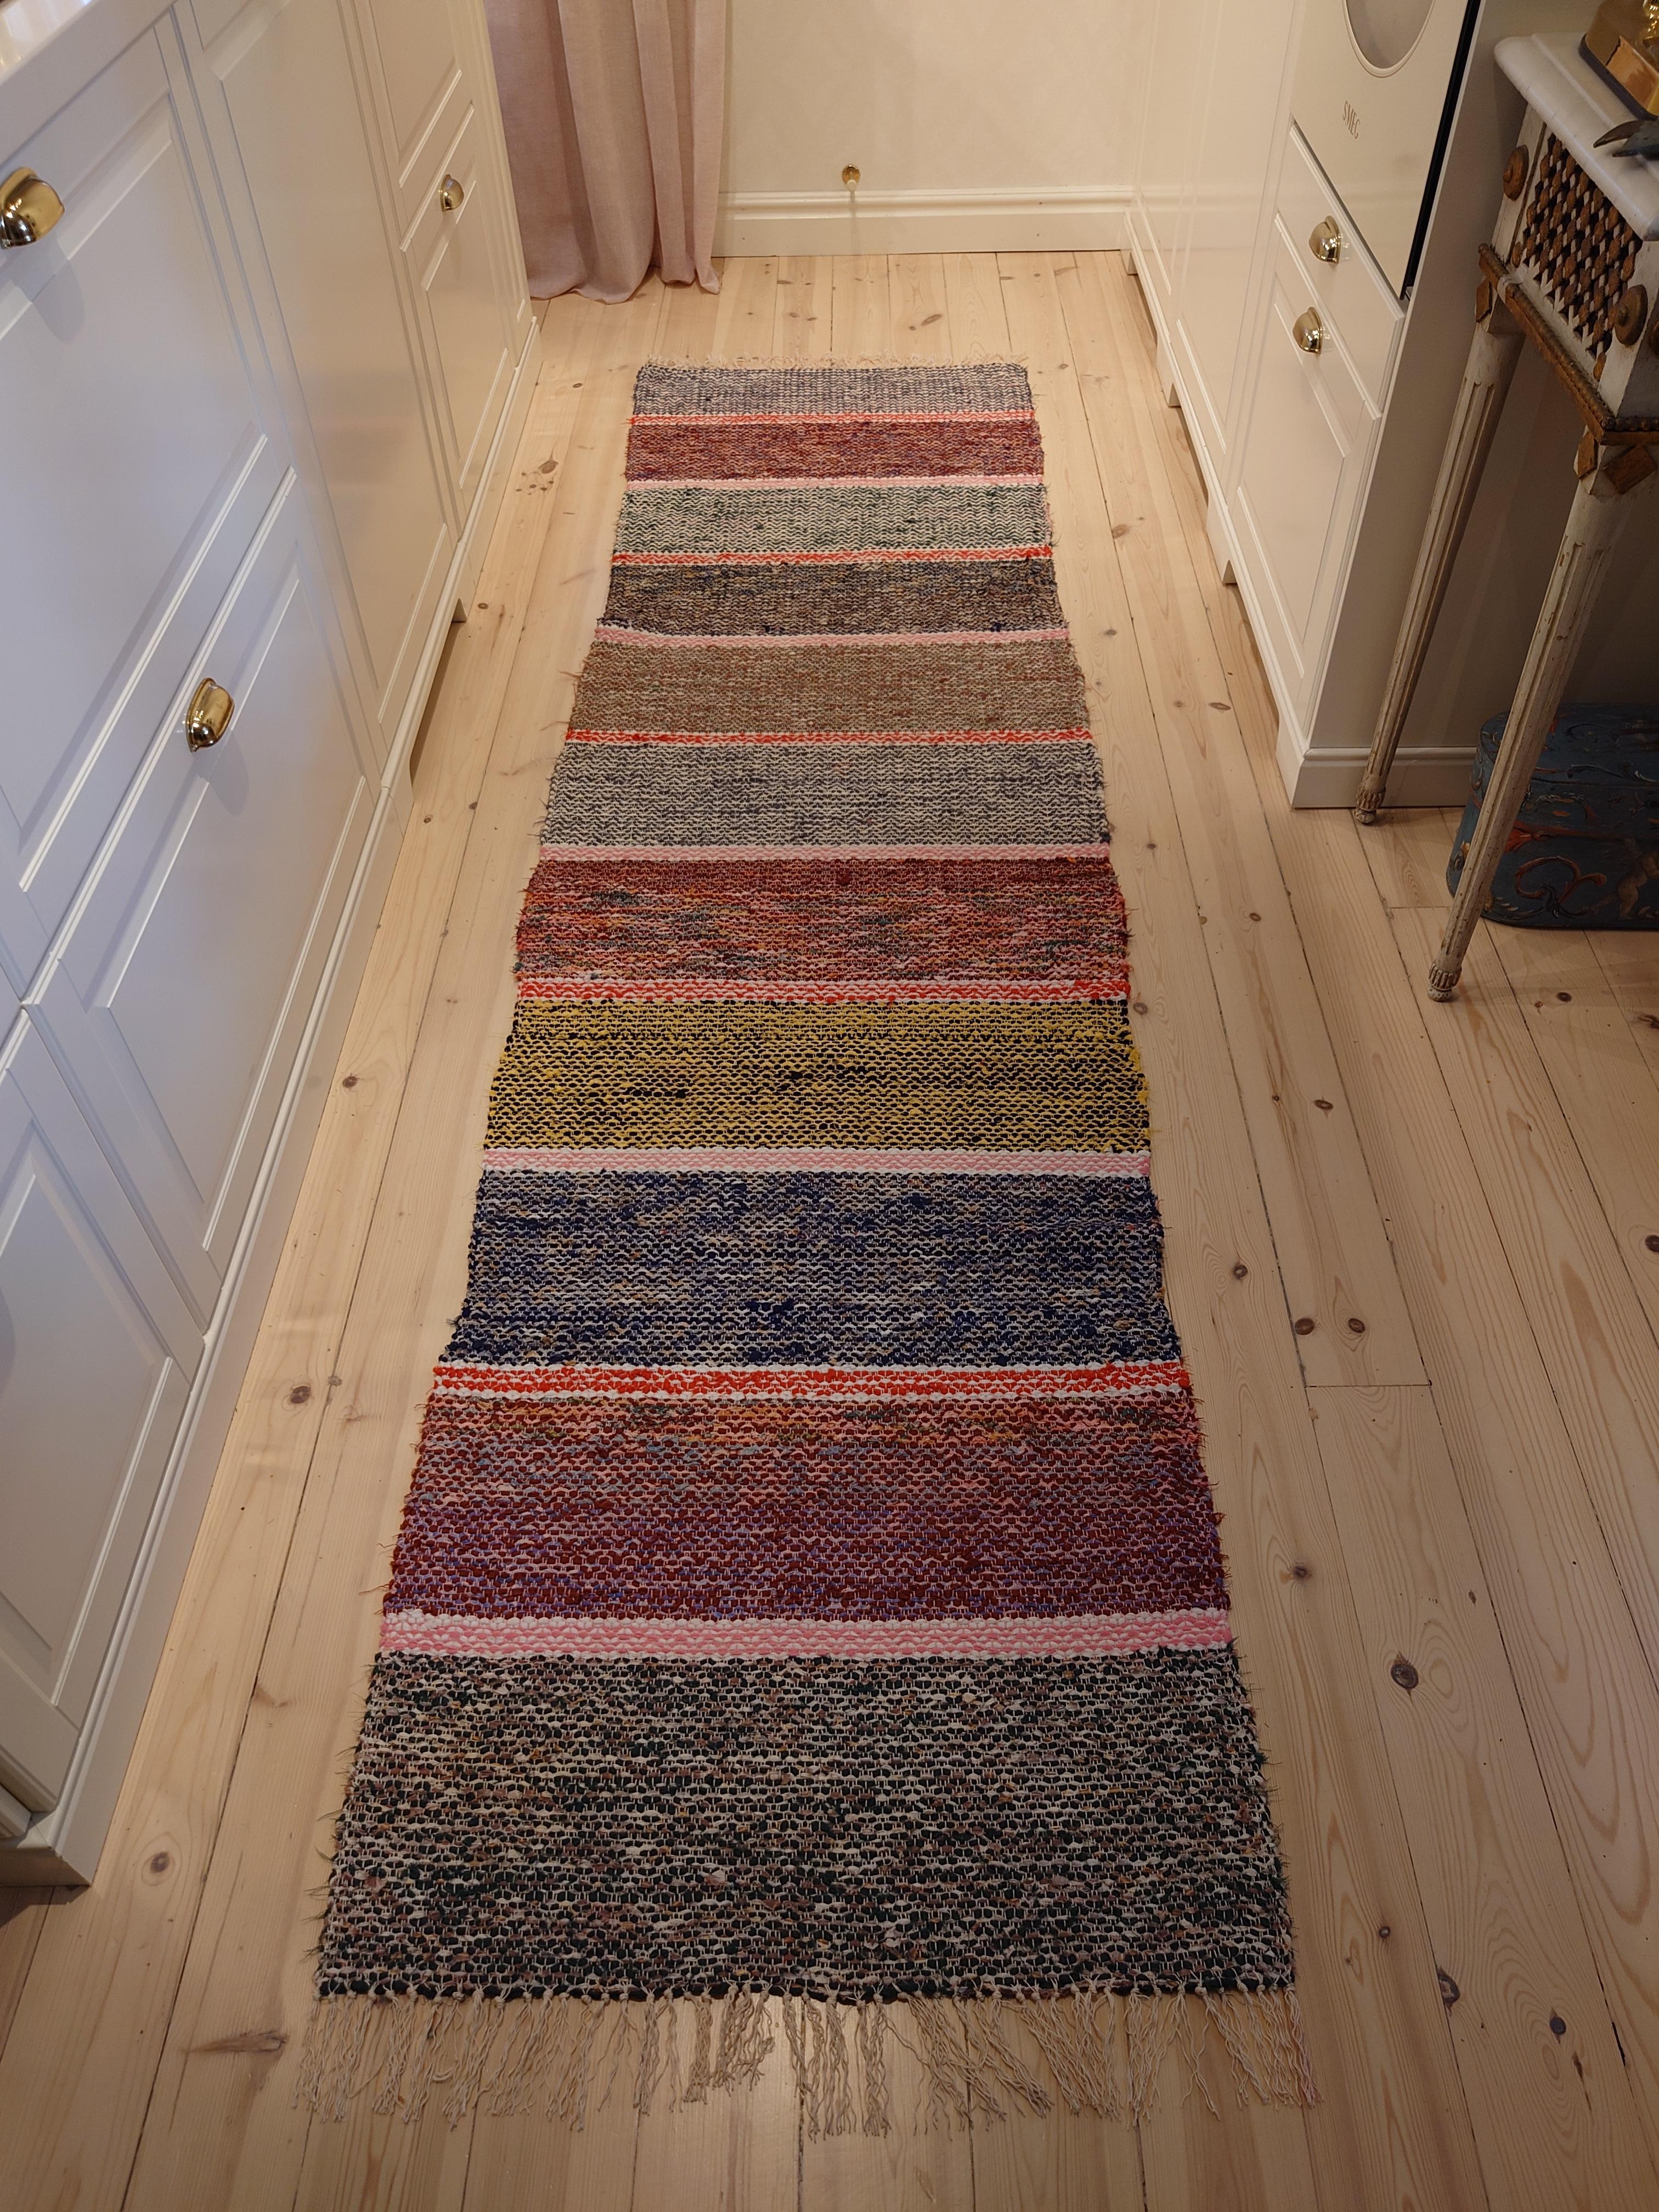 A fantastically Swedish Rag Rug in beautiful color & pattern.
Handwoven in Boden Northern Sweden .
The rug is freshly washed.
Vintage & antique Swedish Rag Rugs from Sweden comes in a variety of color shemes and patterns. They are woven traditional